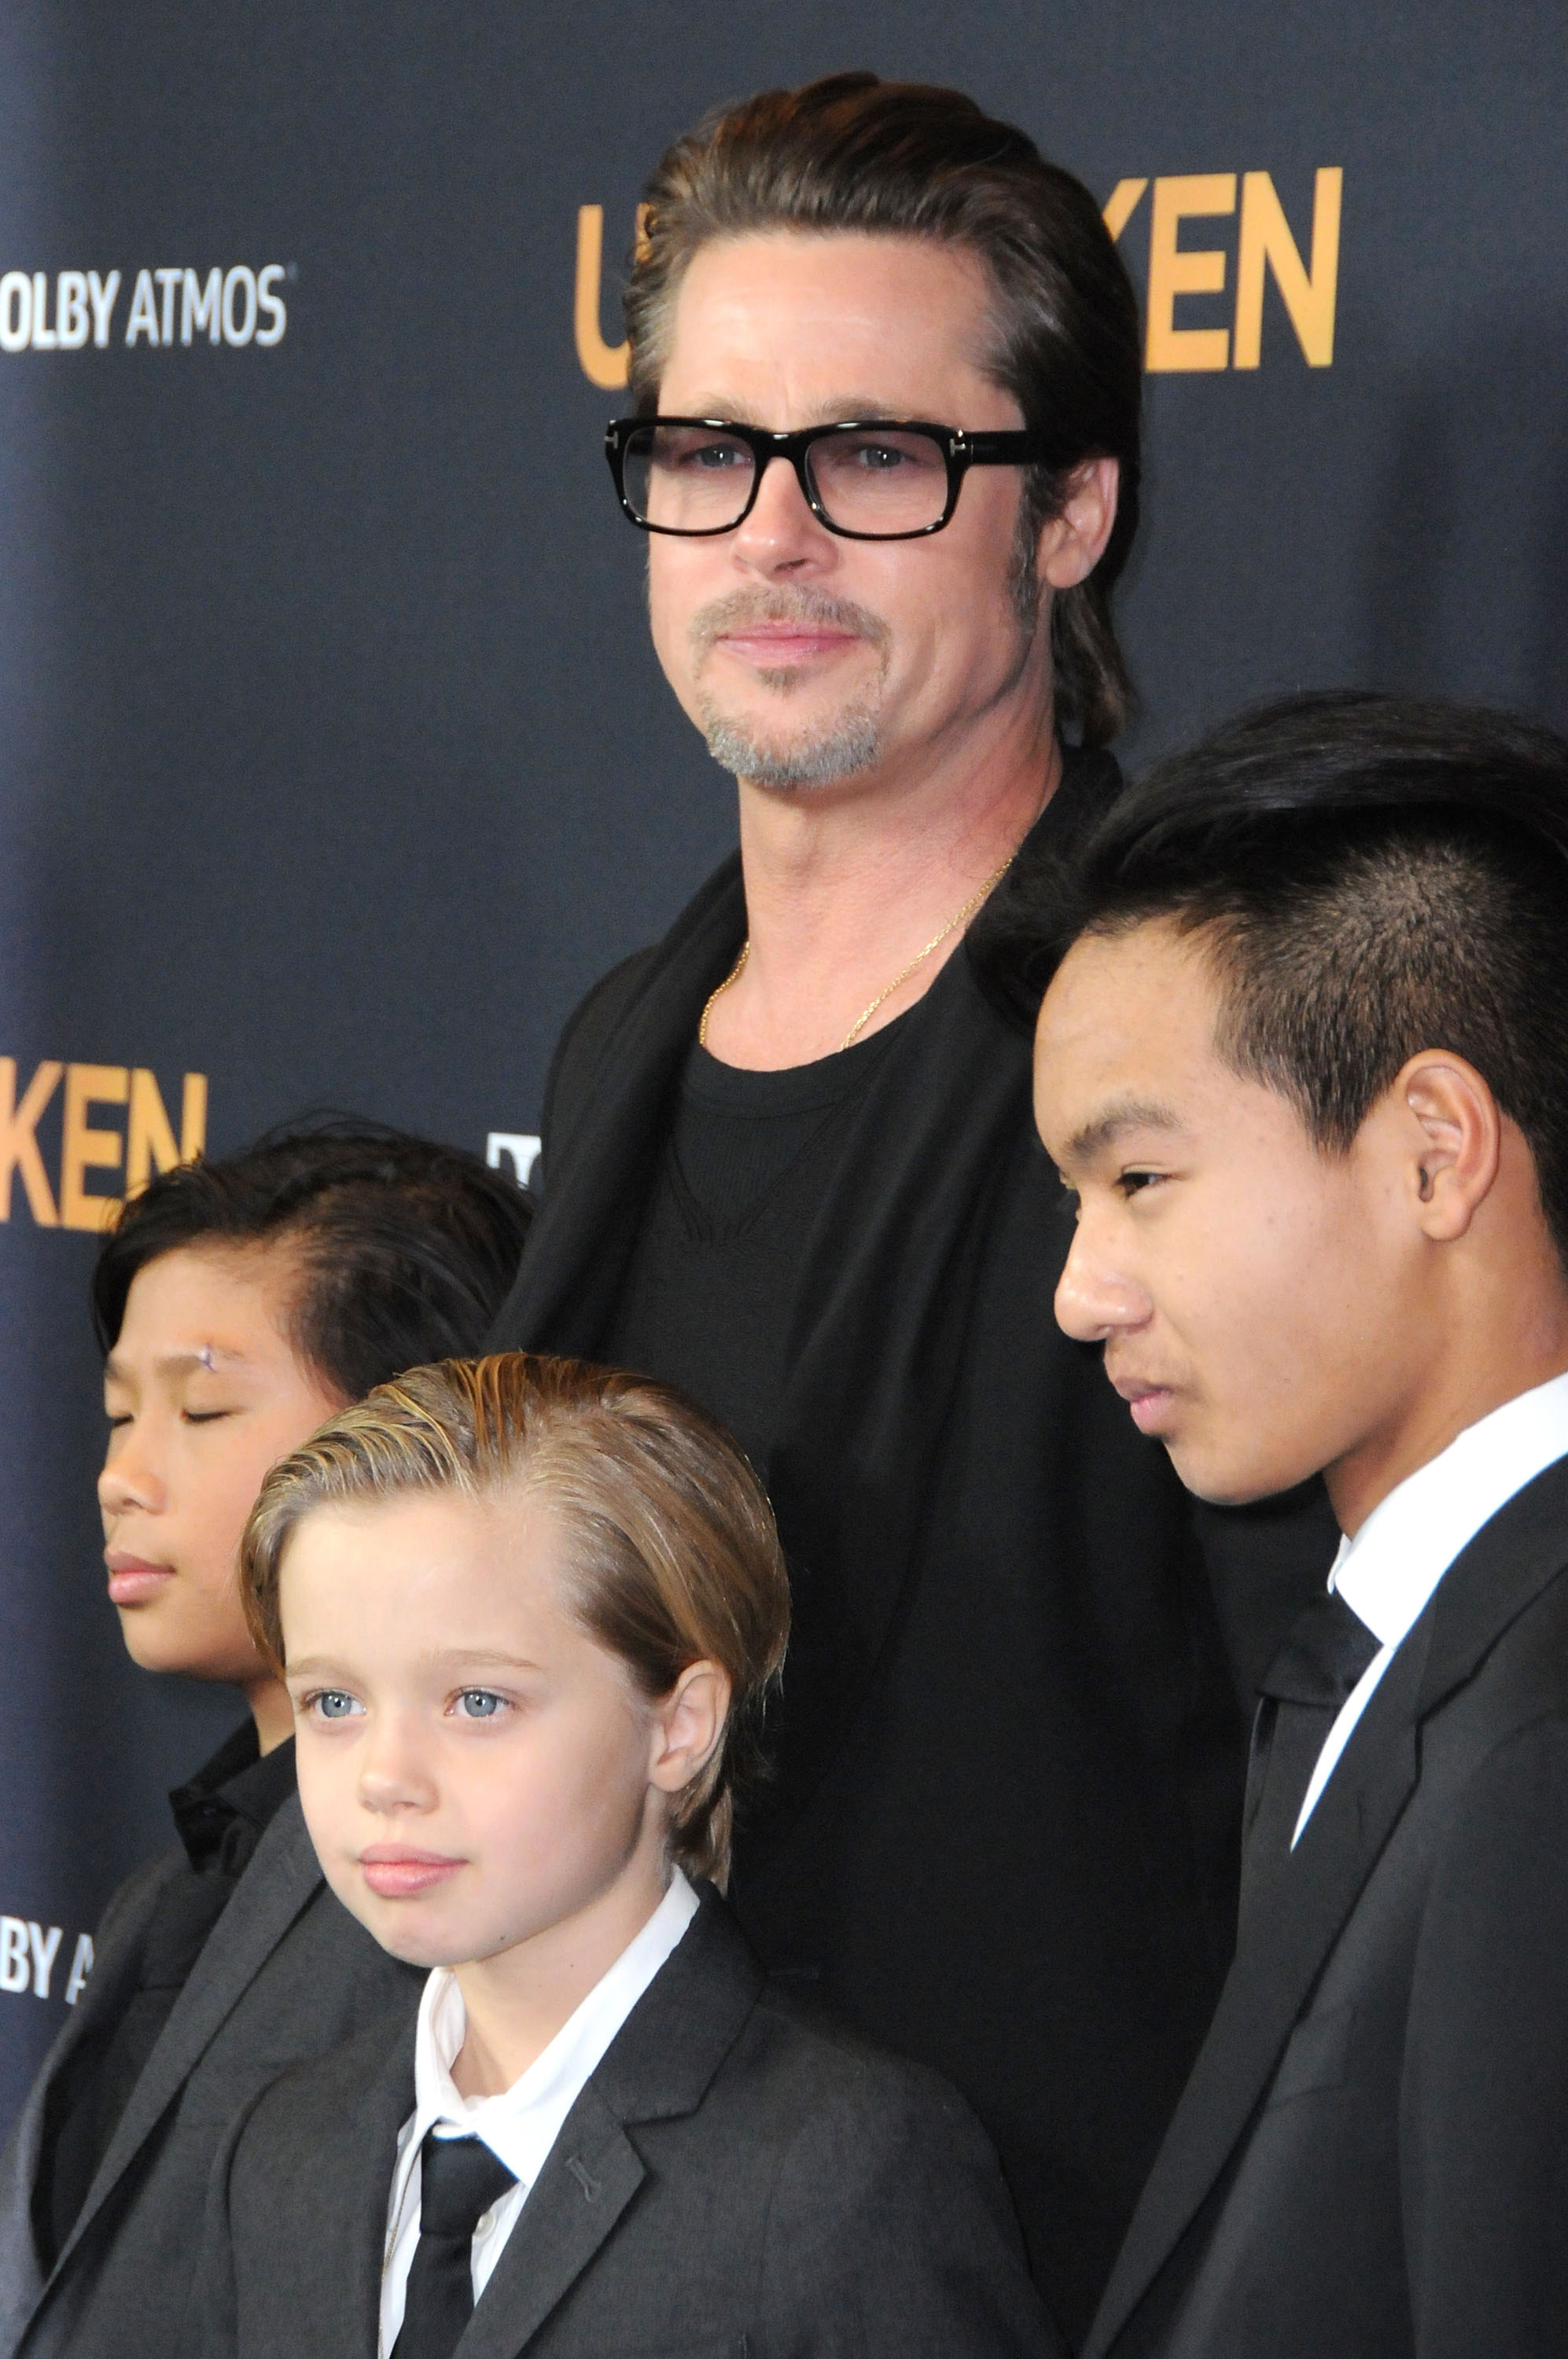 Pax Thien Jolie-Pitt, Shiloh Nouve Jolie-Pitt, Brad Pitt and Maddox Jolie Pitt during the premiere of "Unbroken" at TCL Chinese Theatre IMAX on December 15, 2014, in Hollywood, California. | Source: Getty Images